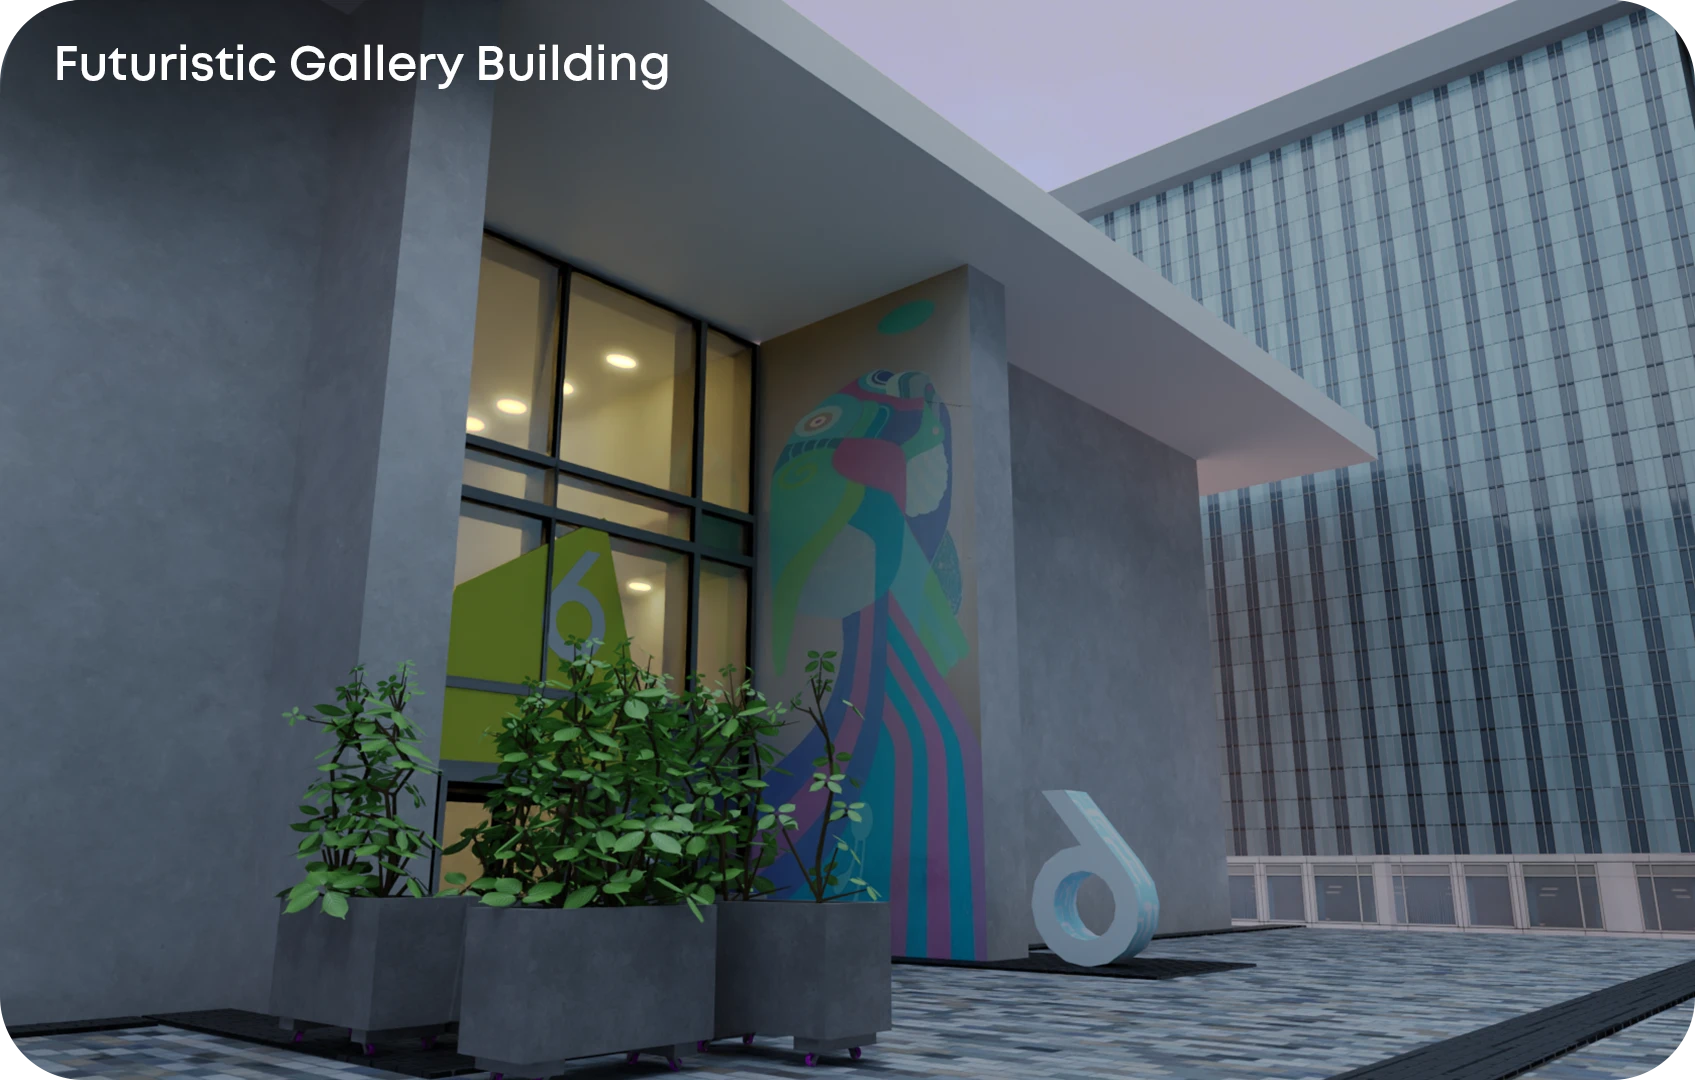 3679-futuristic-gallery-building-1.png